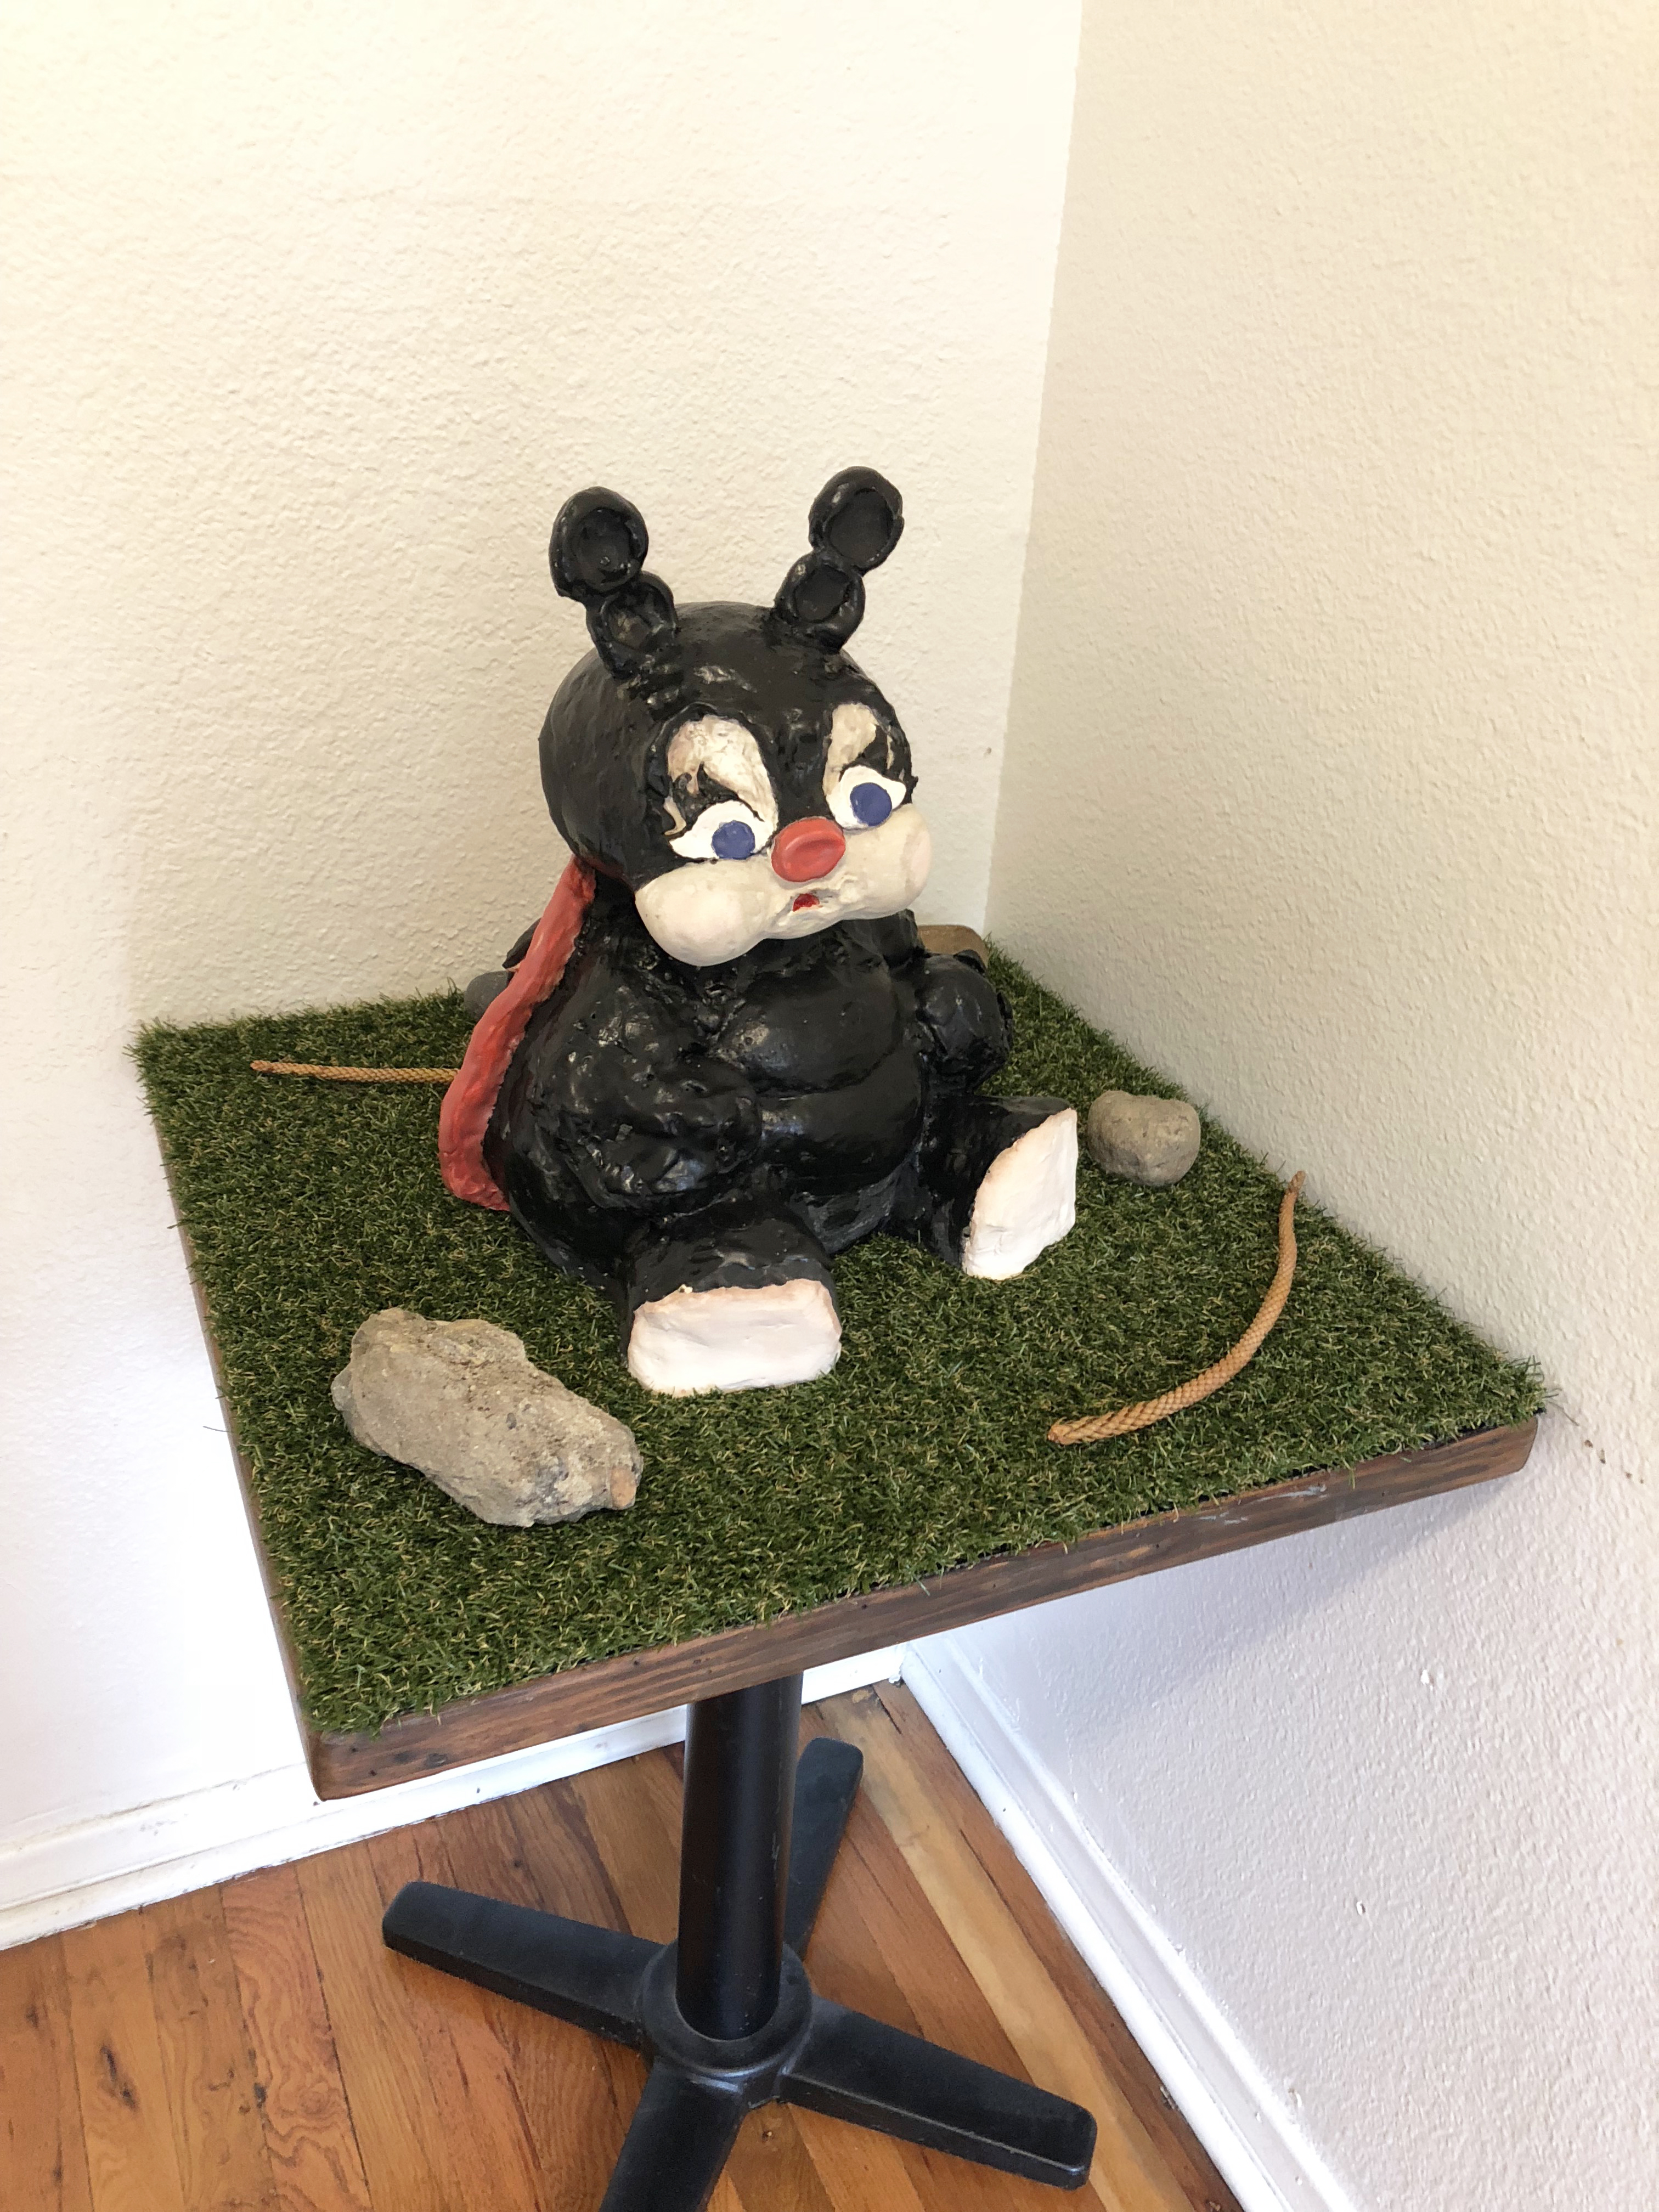 A ceramic sculpture of a black ladybugy on a small table covered in astroturf